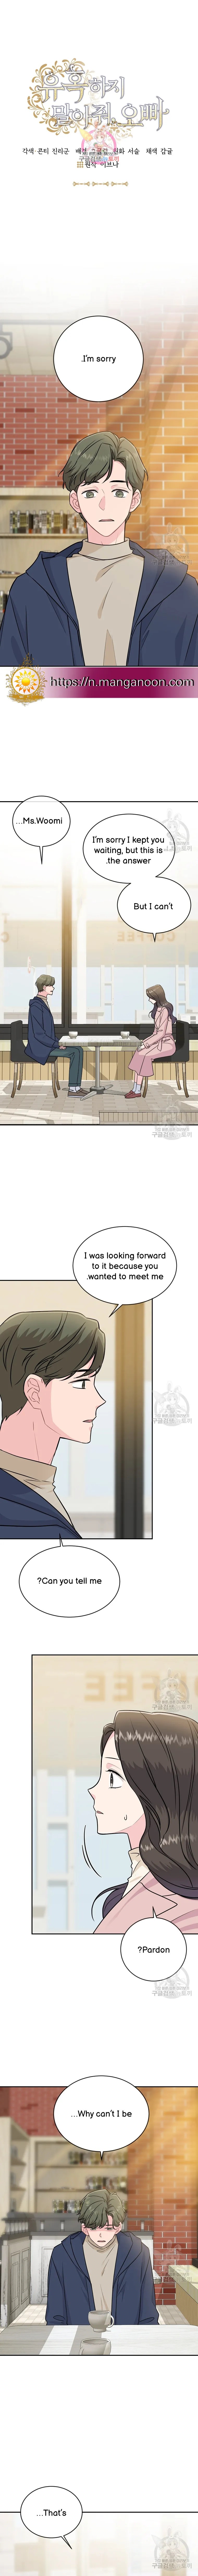 Don't Tempt Me, Oppa - Page 2